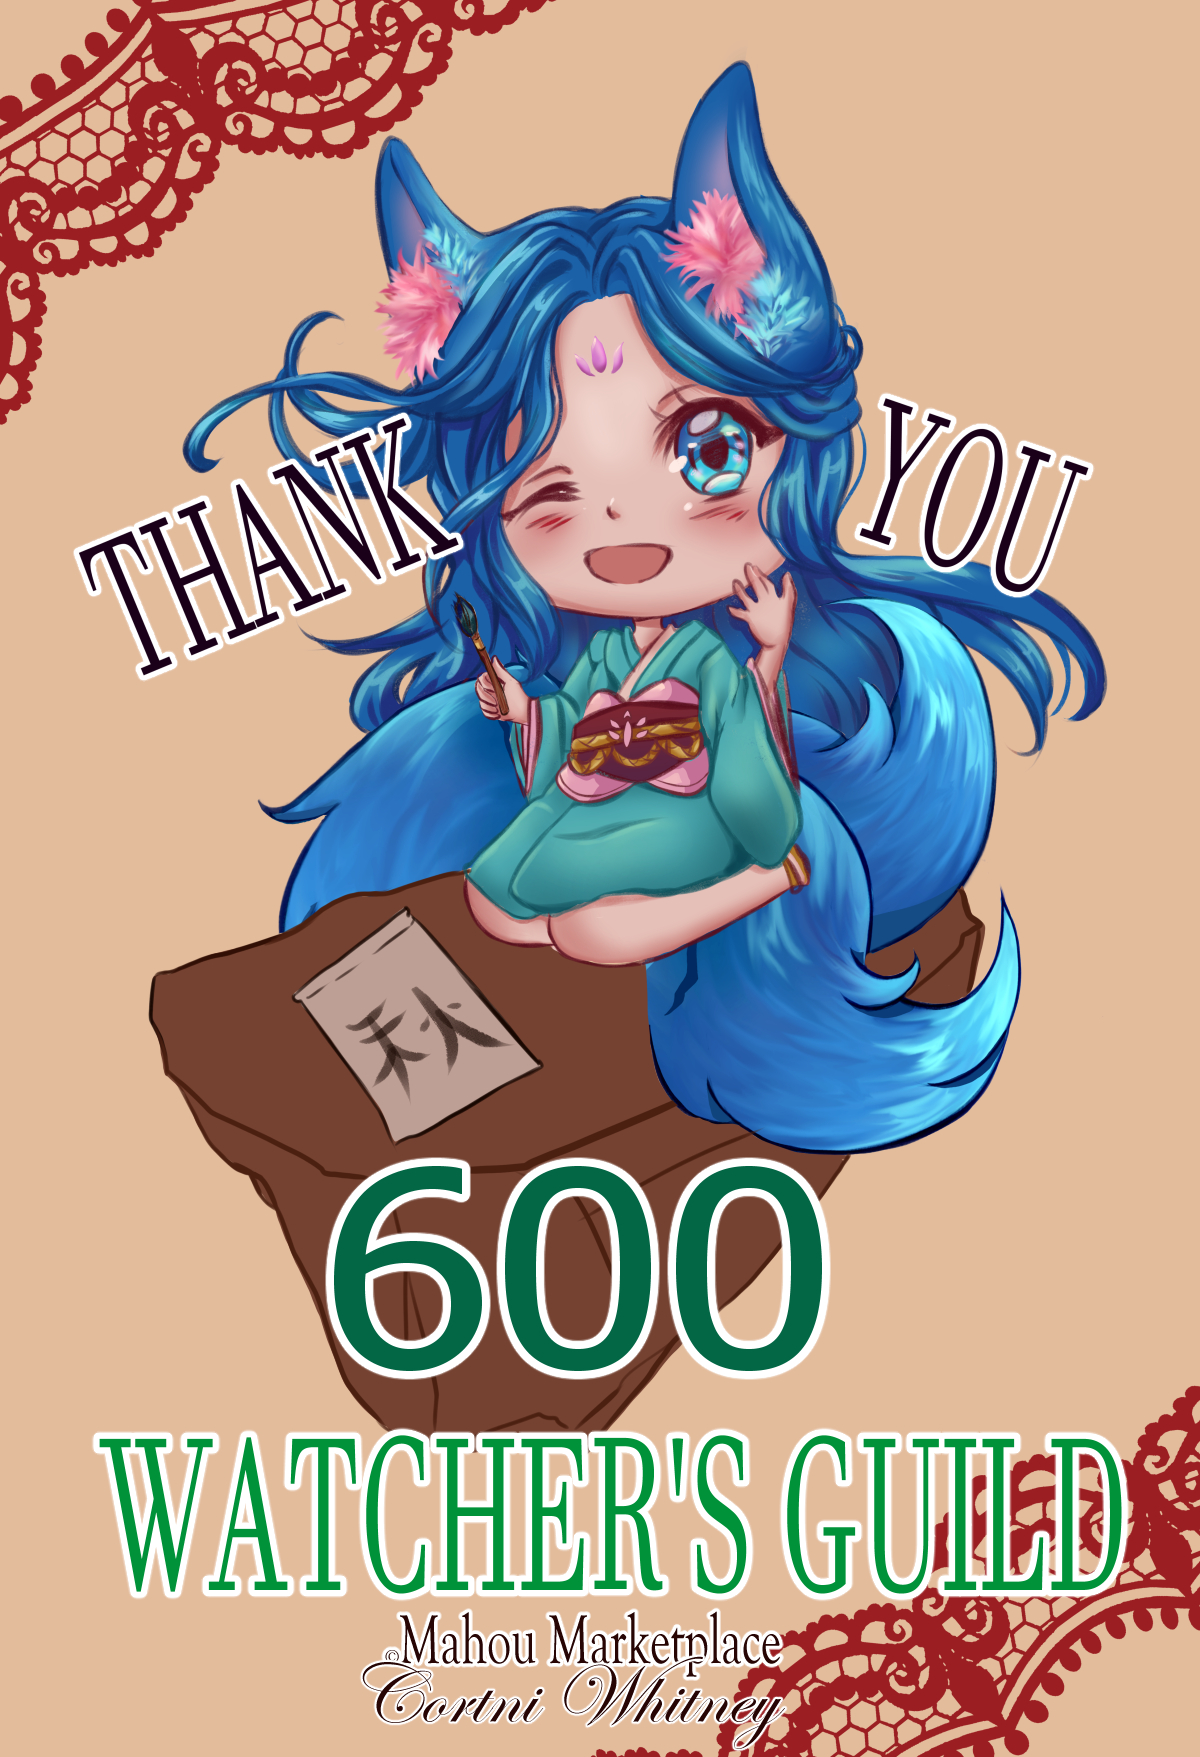 Thank you for 600 Watchers